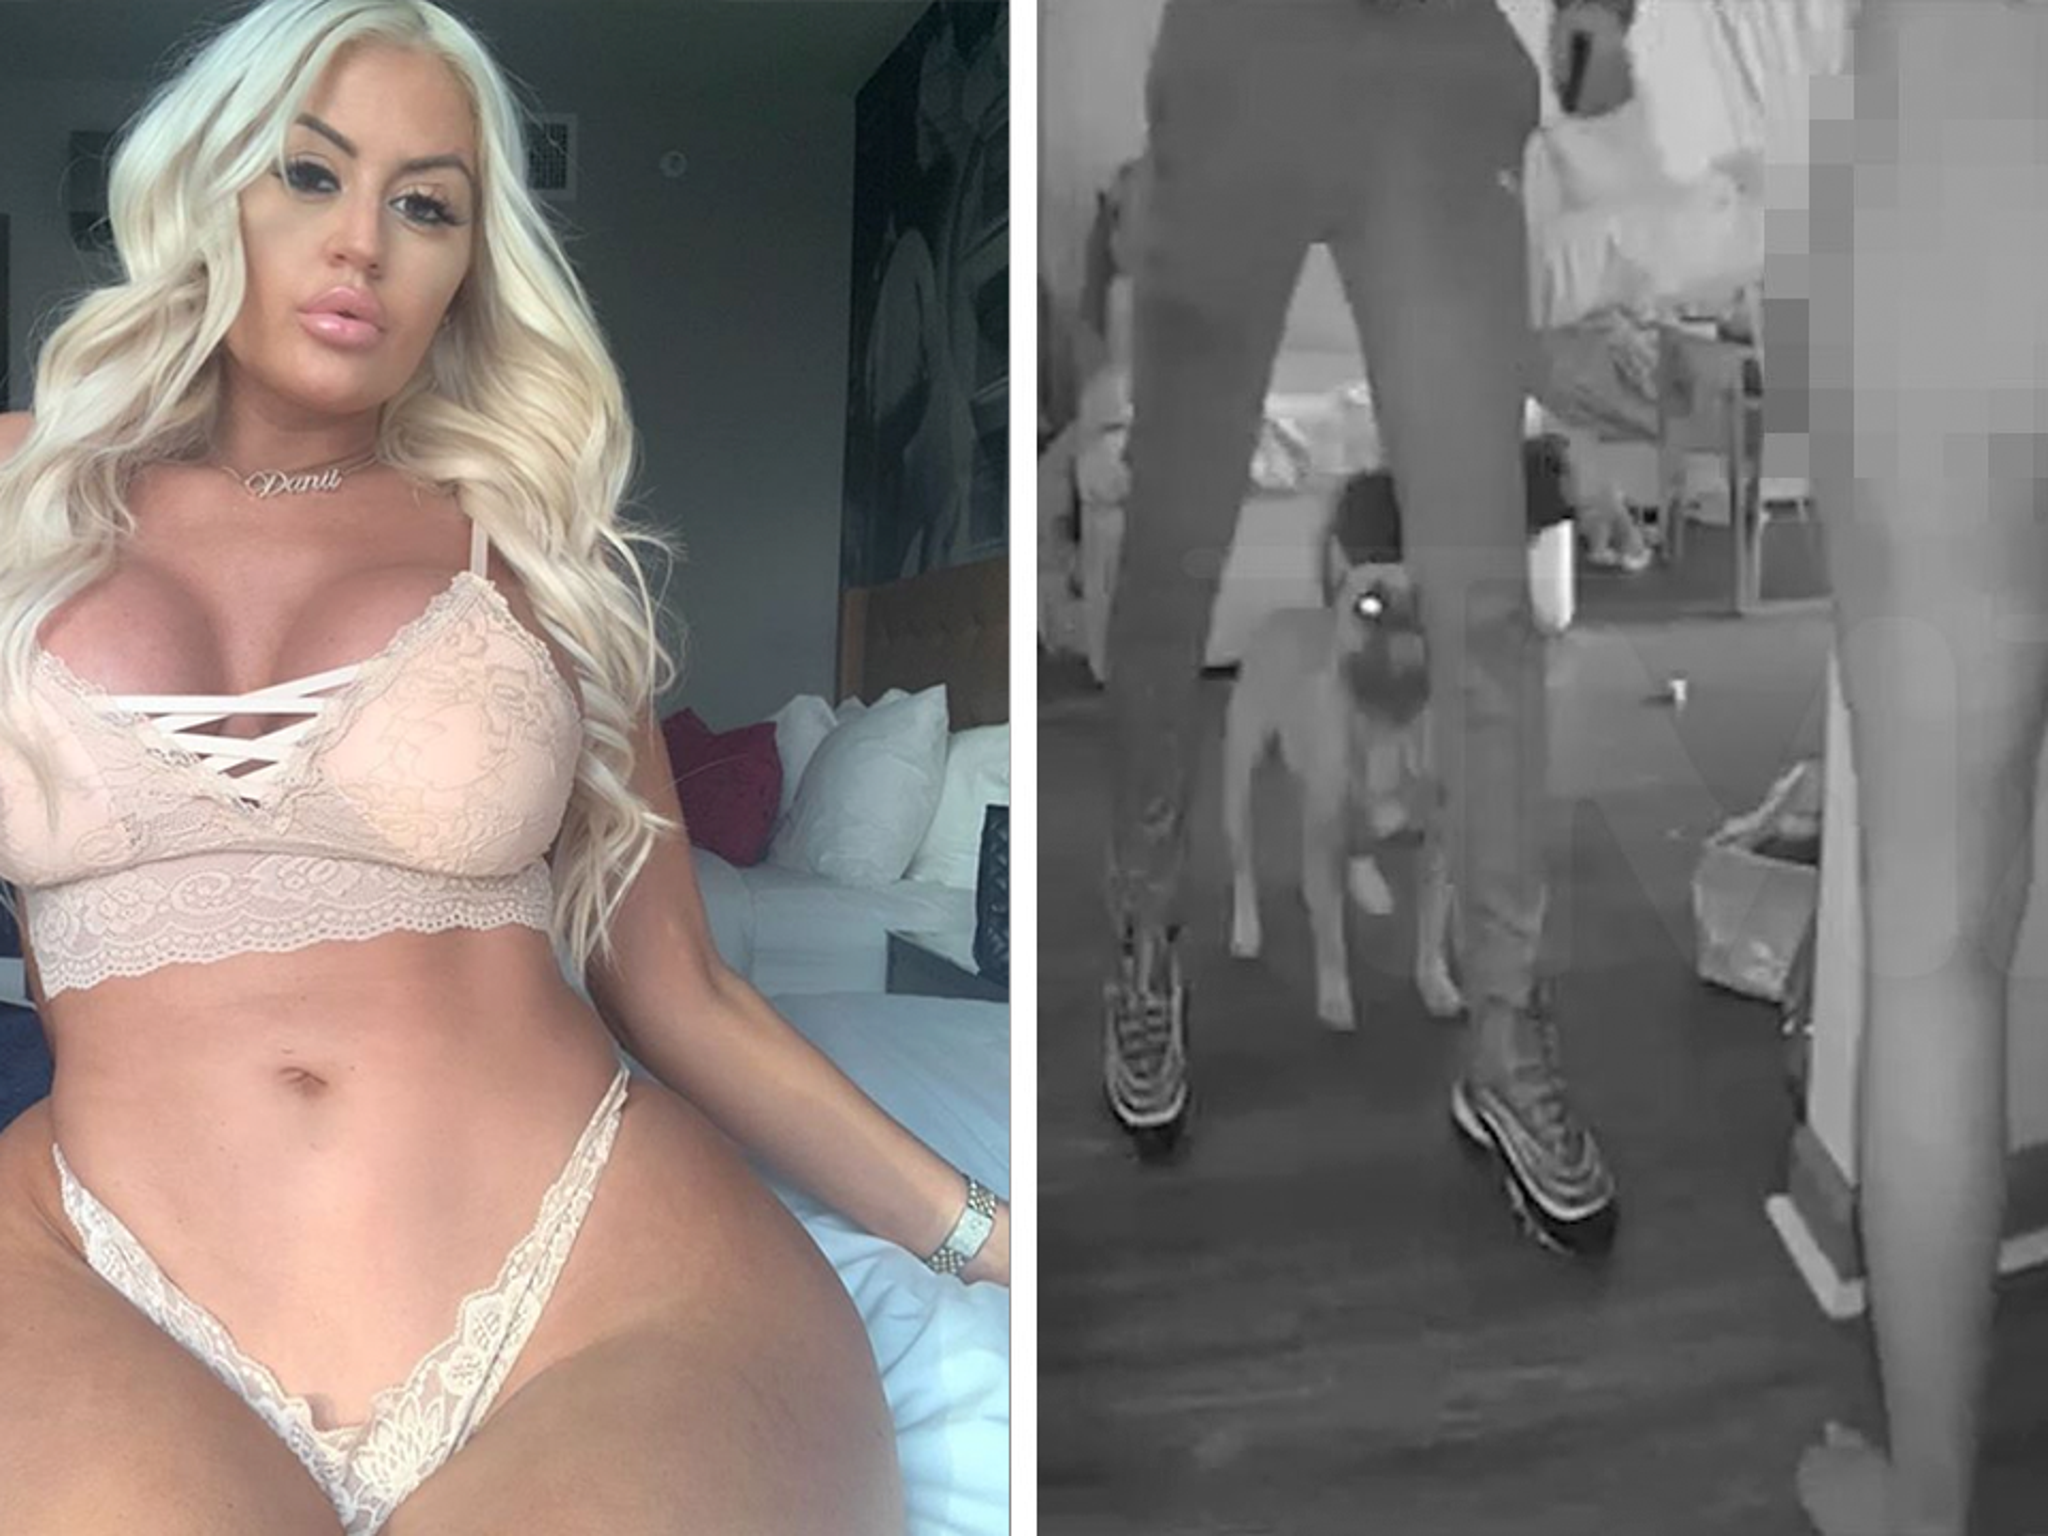 Model Confronts Armed Robber While Naked!